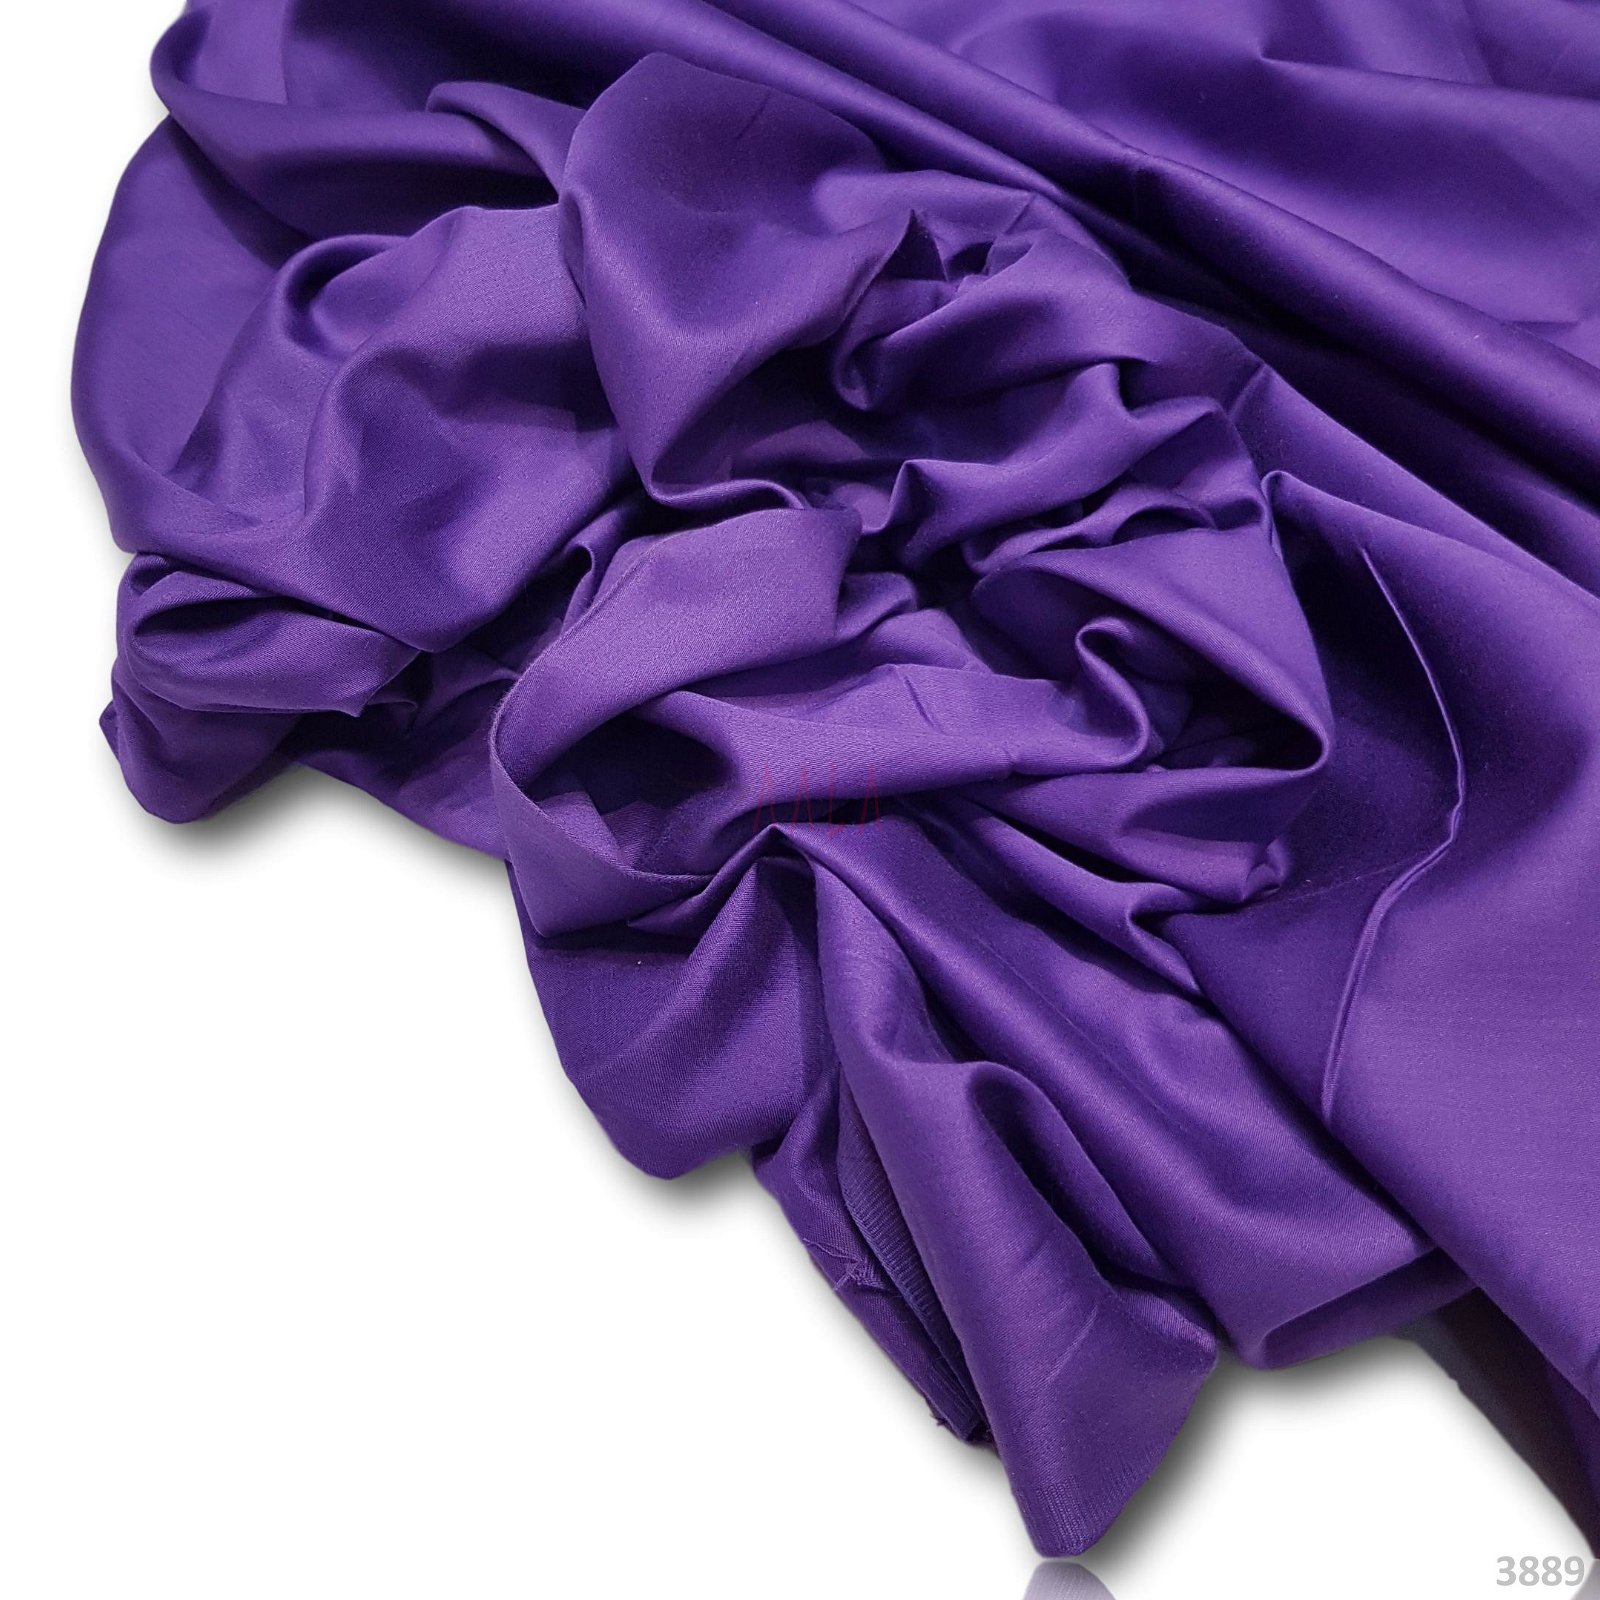 Satin Cotton 44 Inches Dyed Per Metre #3889